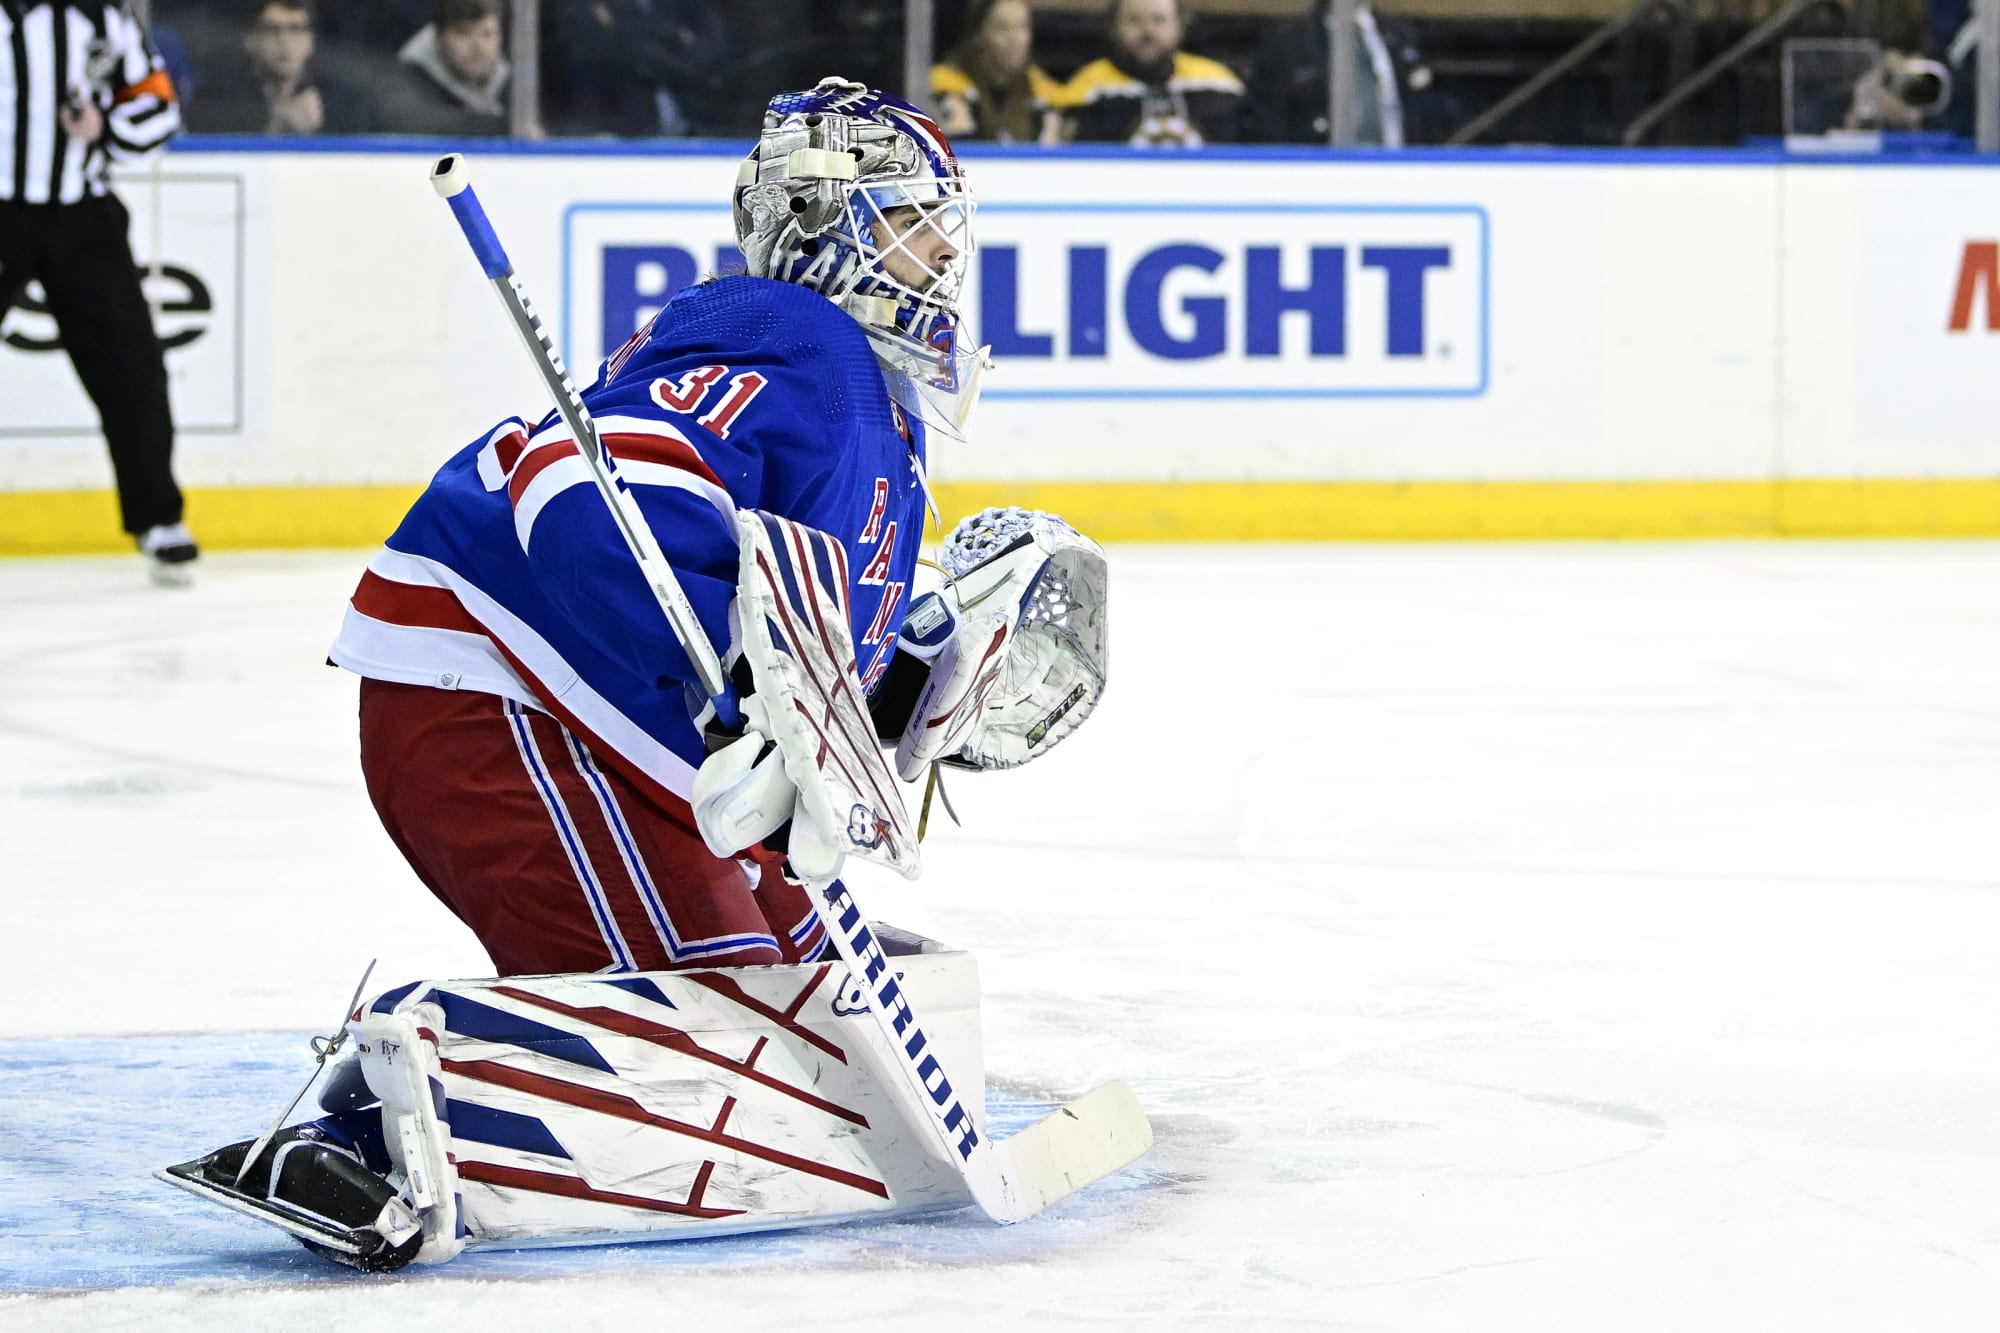 From Moscow to Manhattan: A closer look at New York Rangers' Igor